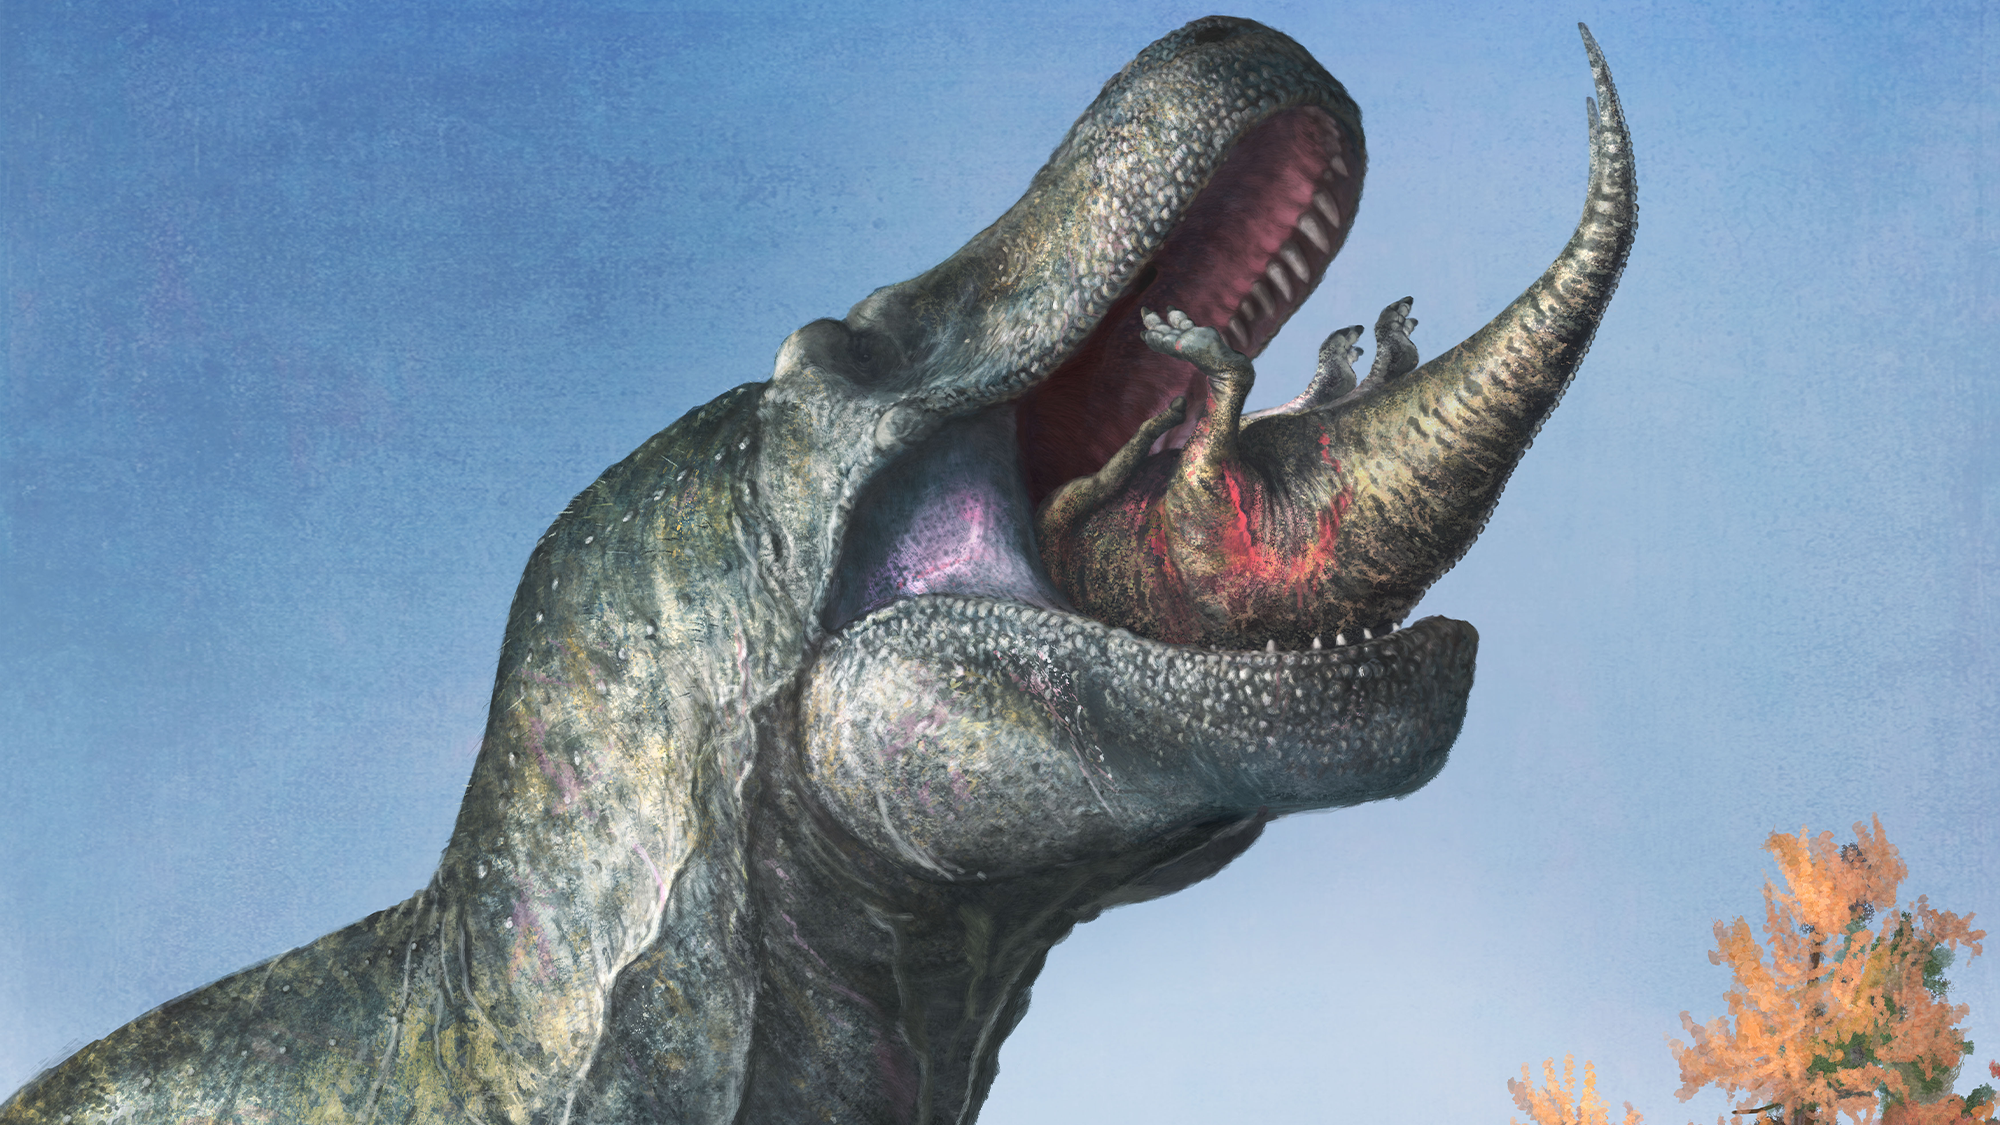 A juvenile Edmontosaurus disappears into the enormous, lipped mouth of Tyrannosaurus.